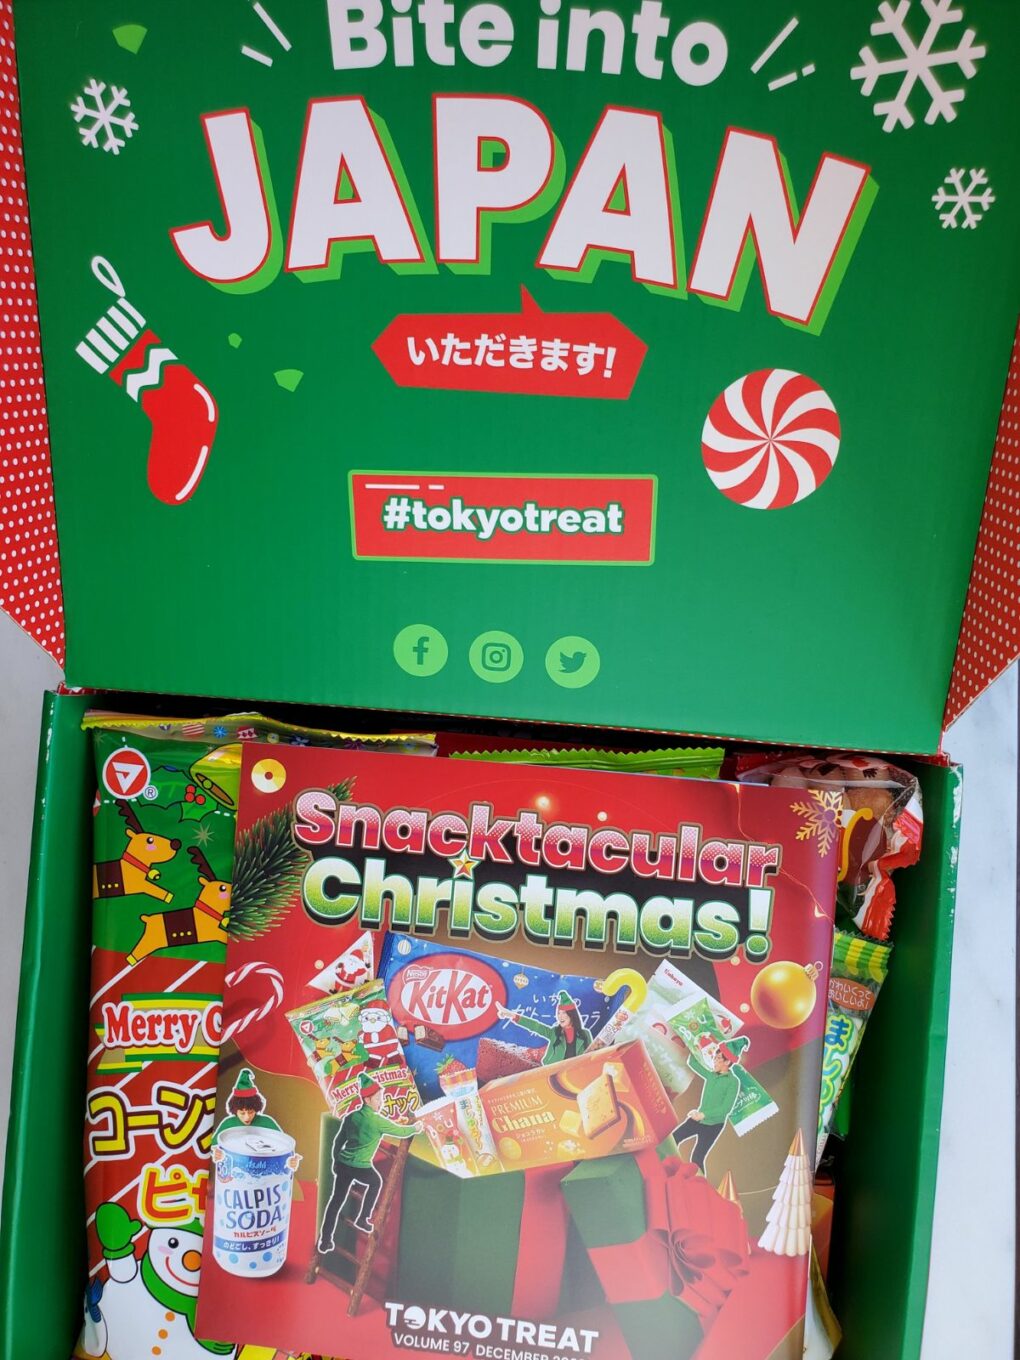 opened tokyo treat box with Christmas material at the top.